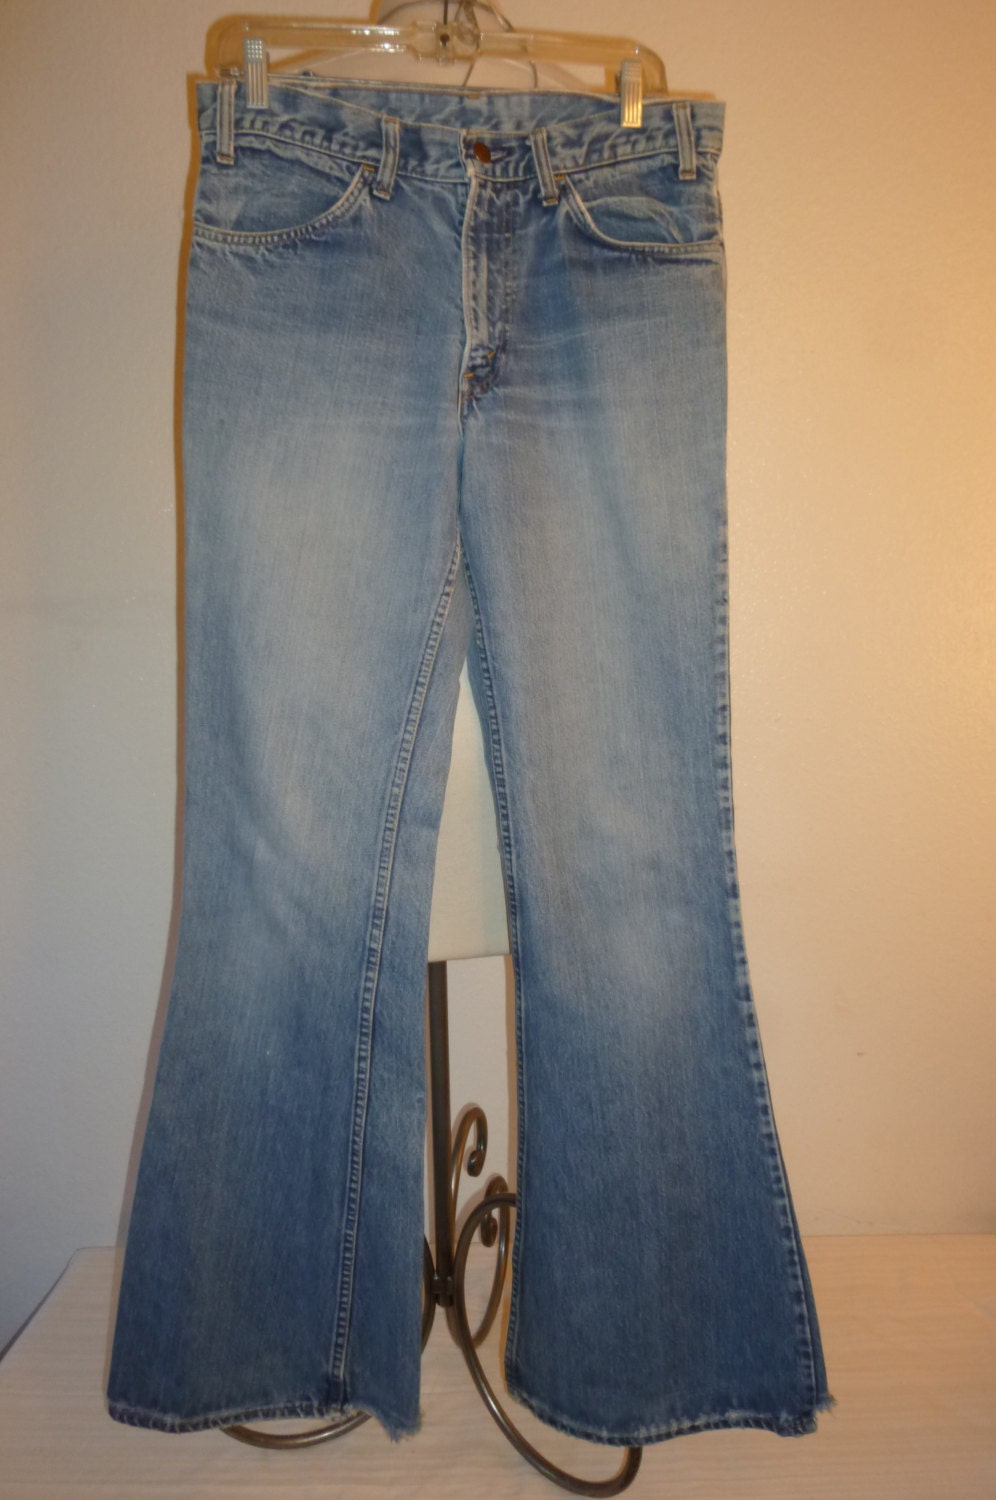 1960s LEVI'S BELLBOTTOM blue JEANS by ScreamingRags on Etsy